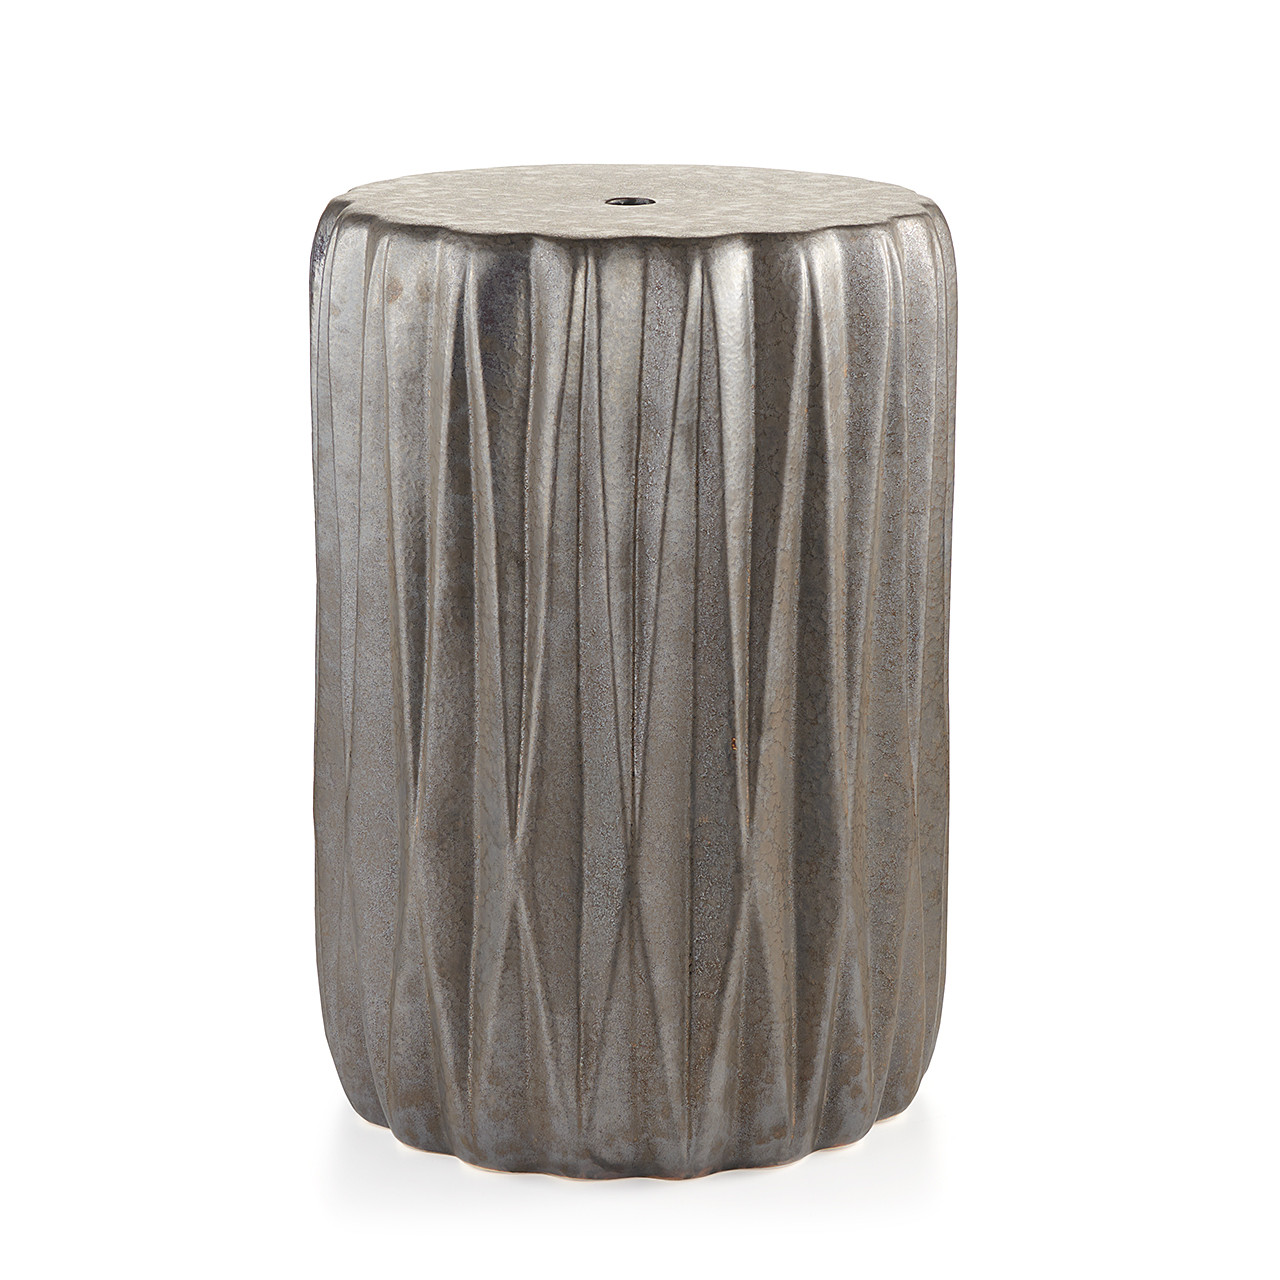 Aynor Metallic Gold and Silver Ceramic 12 in. x 17 in. Garden Stool